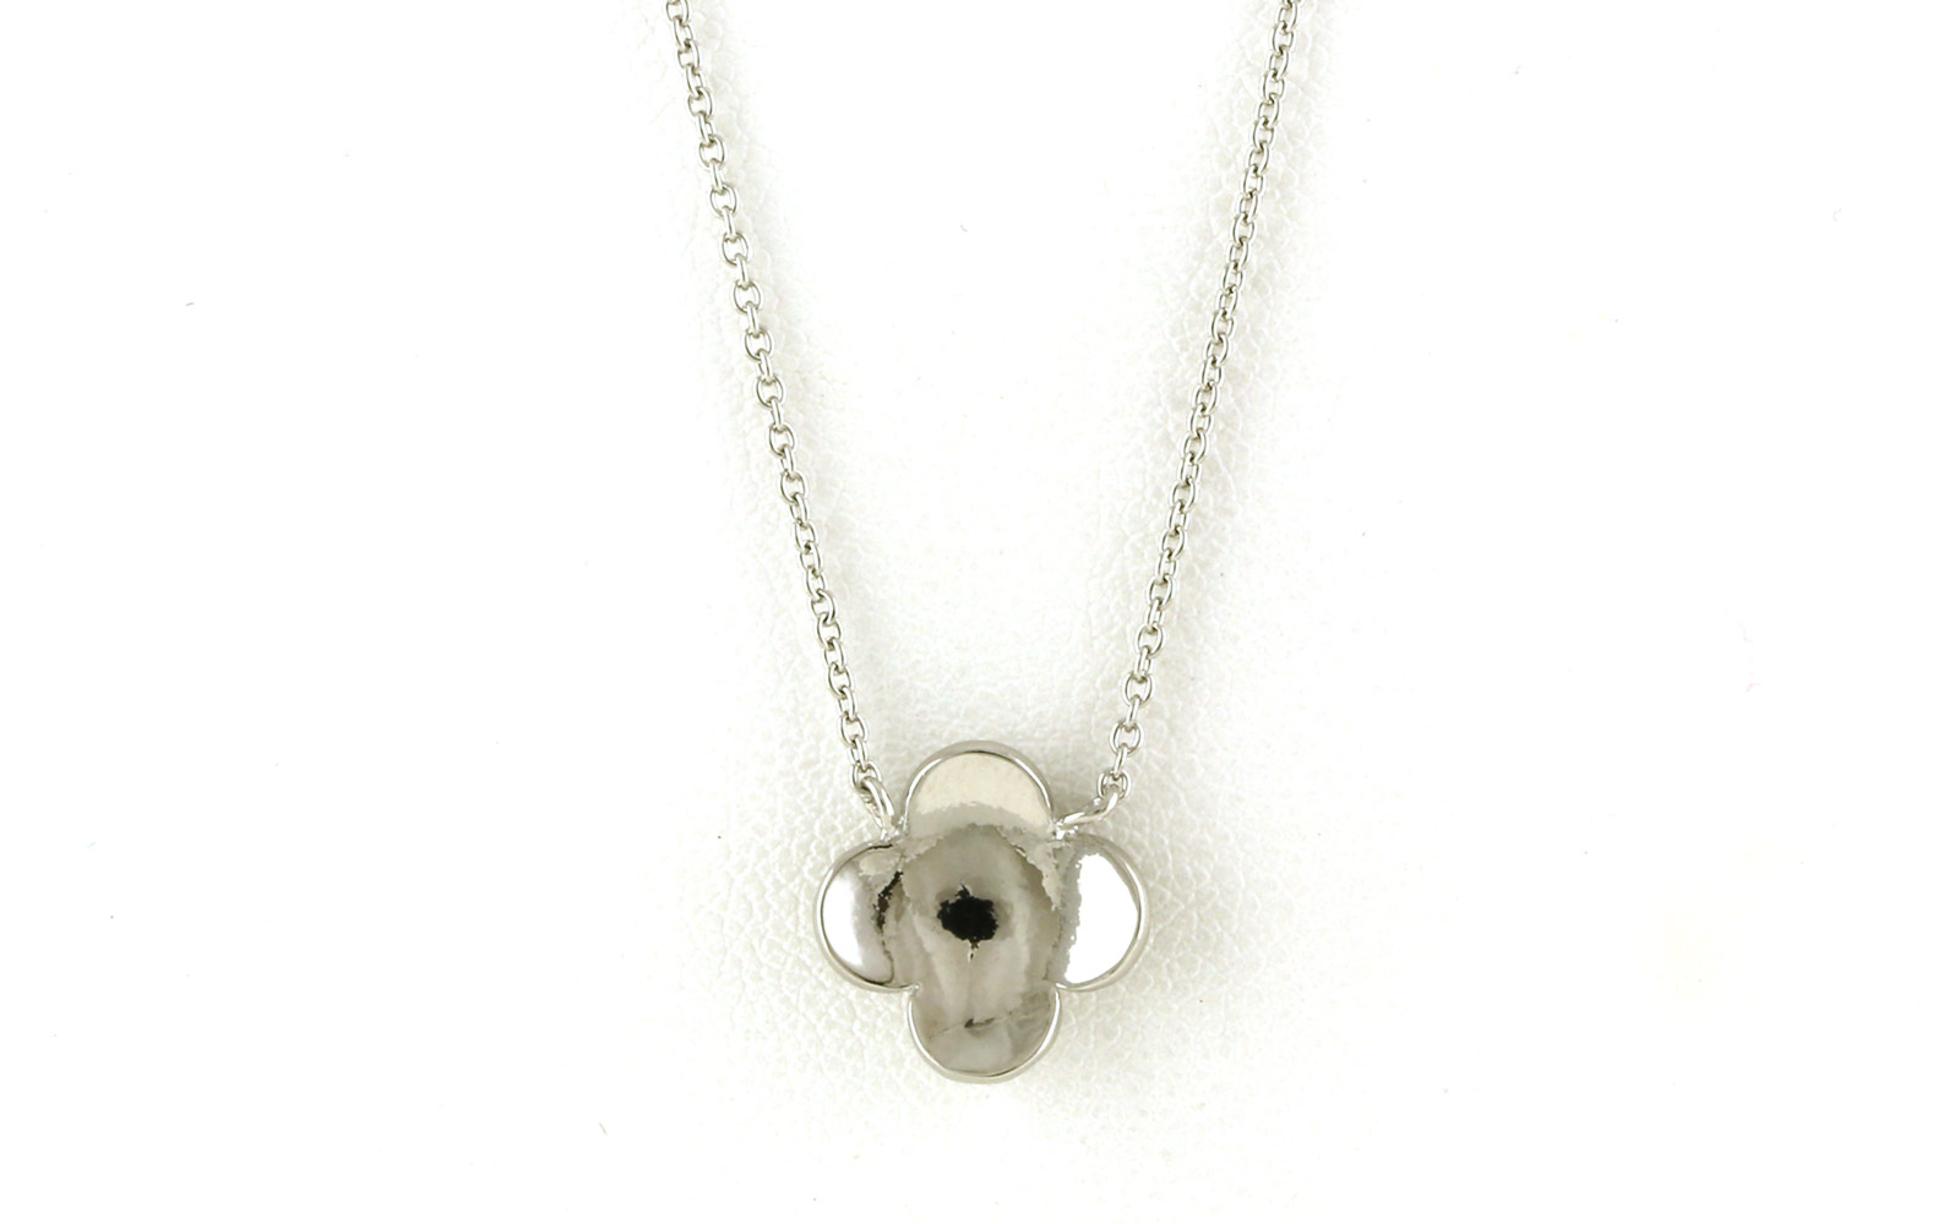 Concave Clover Necklace on Split Chain in Sterling Silver